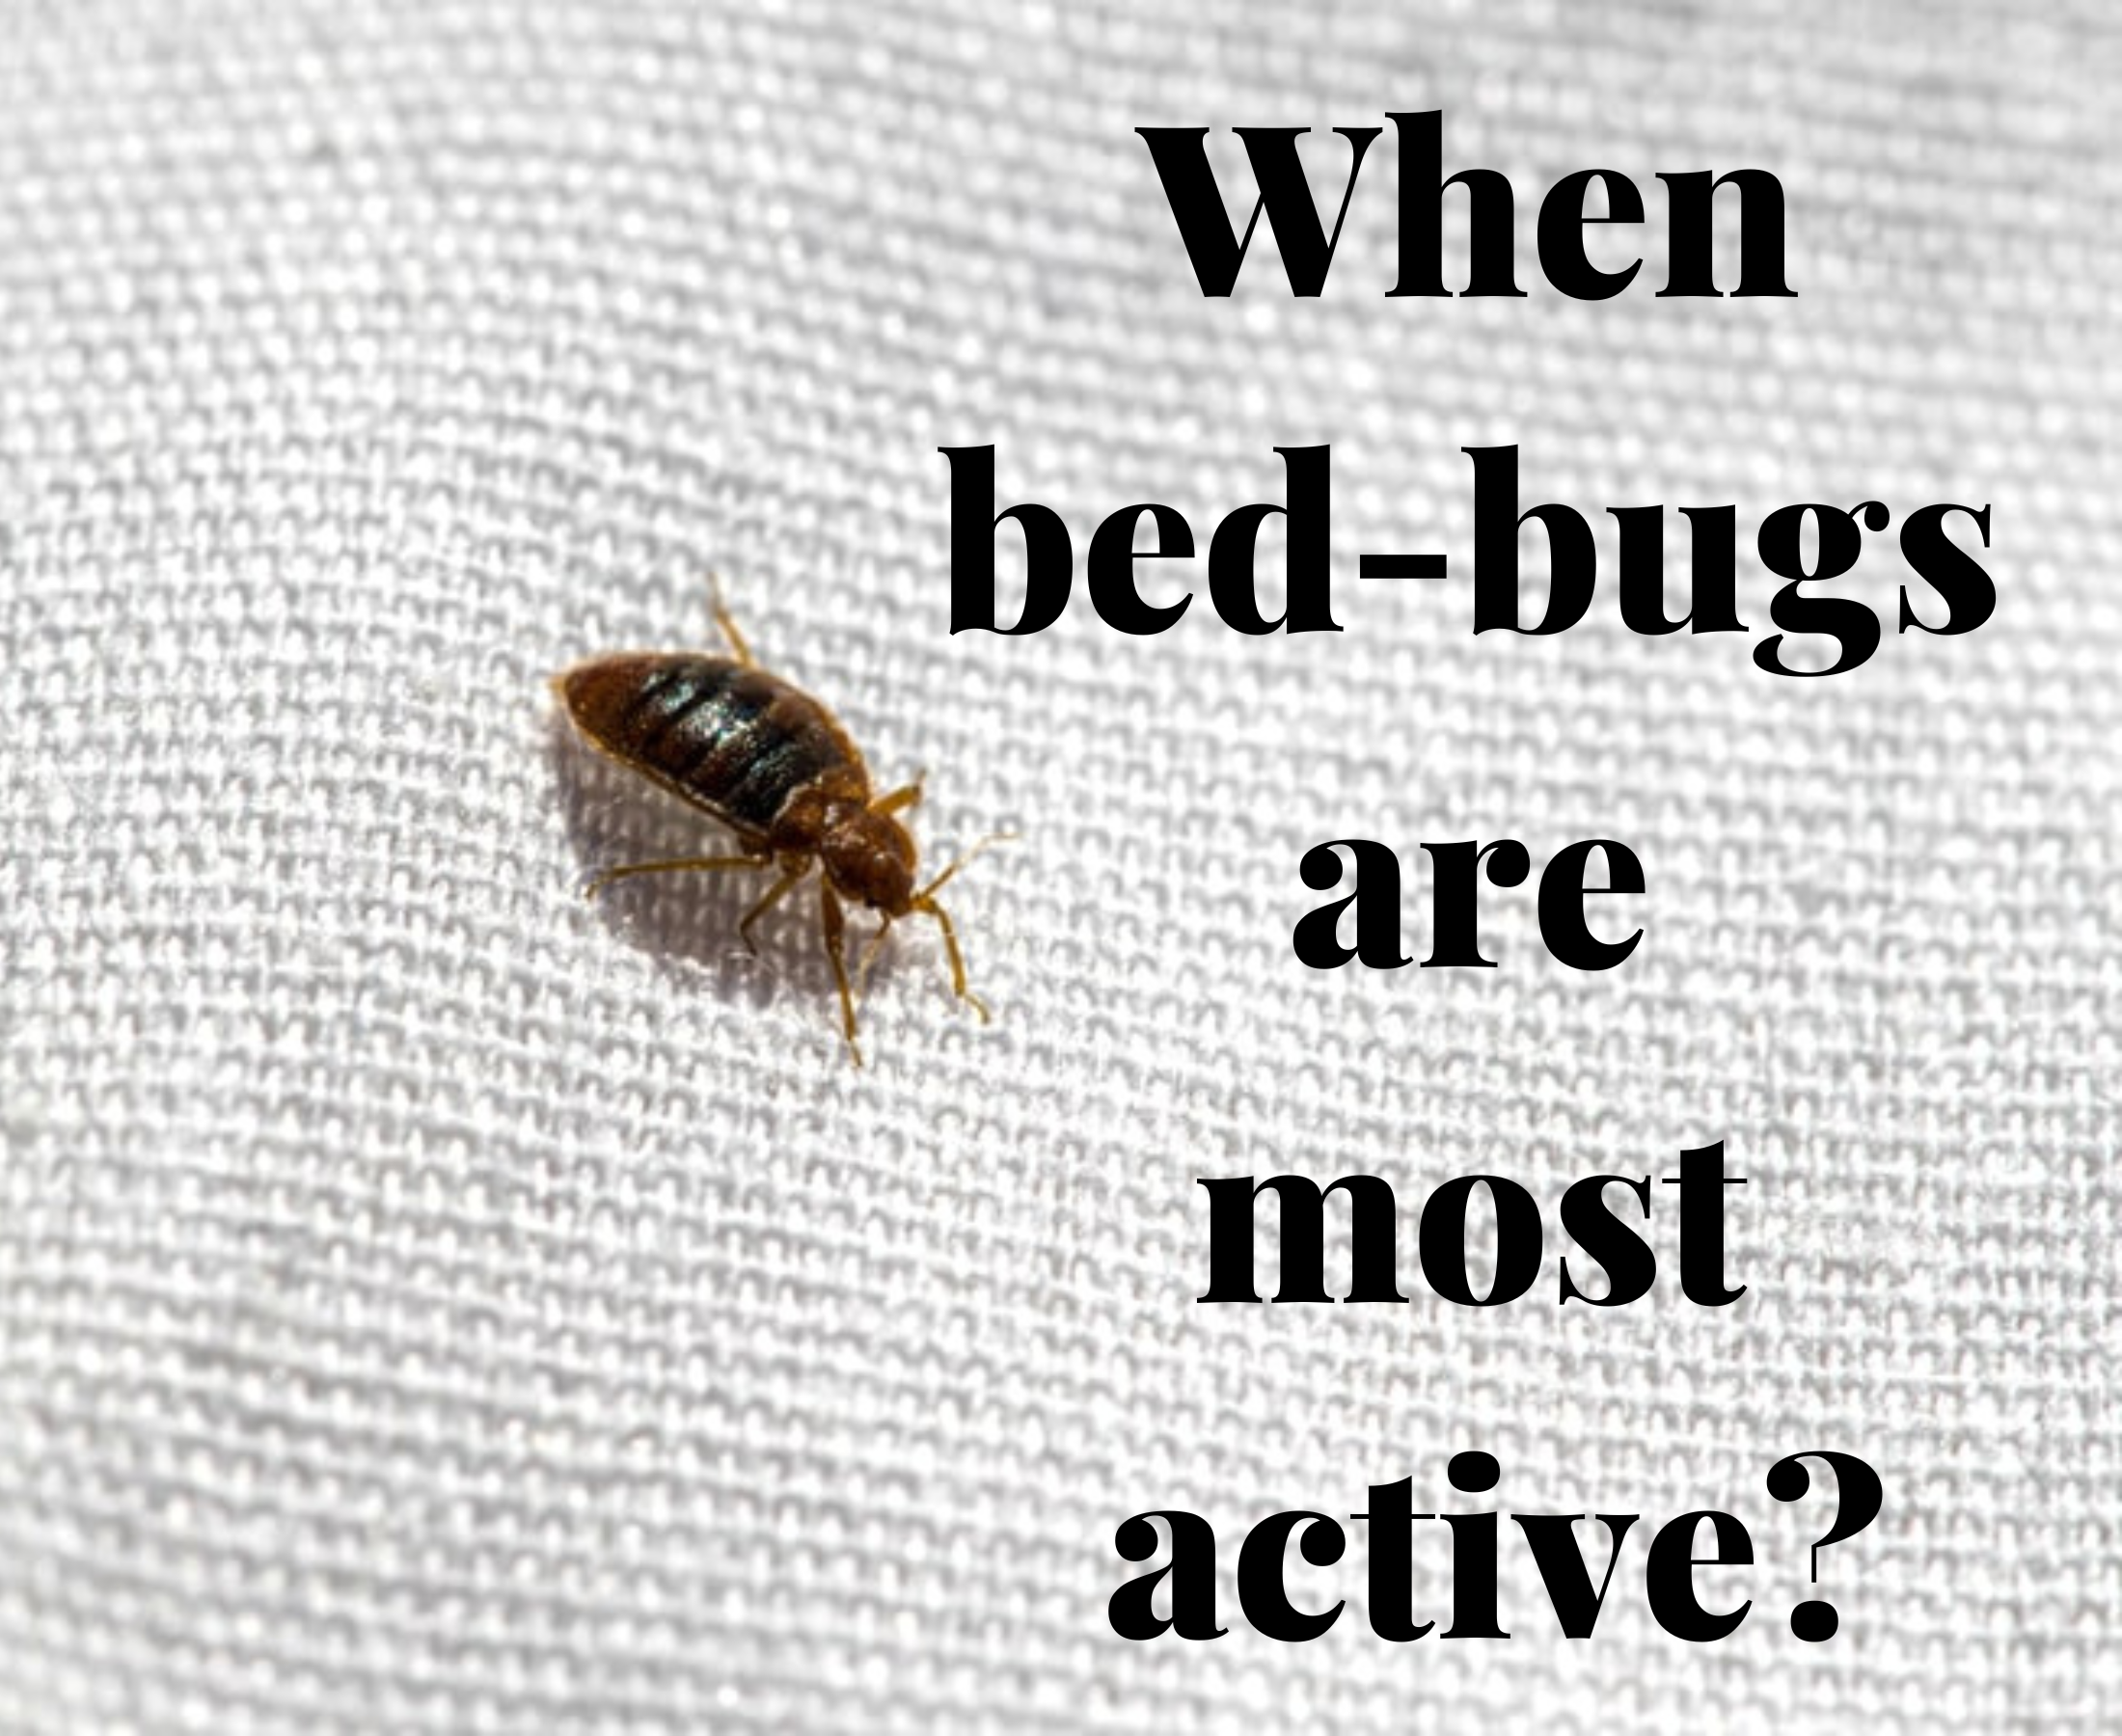 What time of day bed bug is most active?